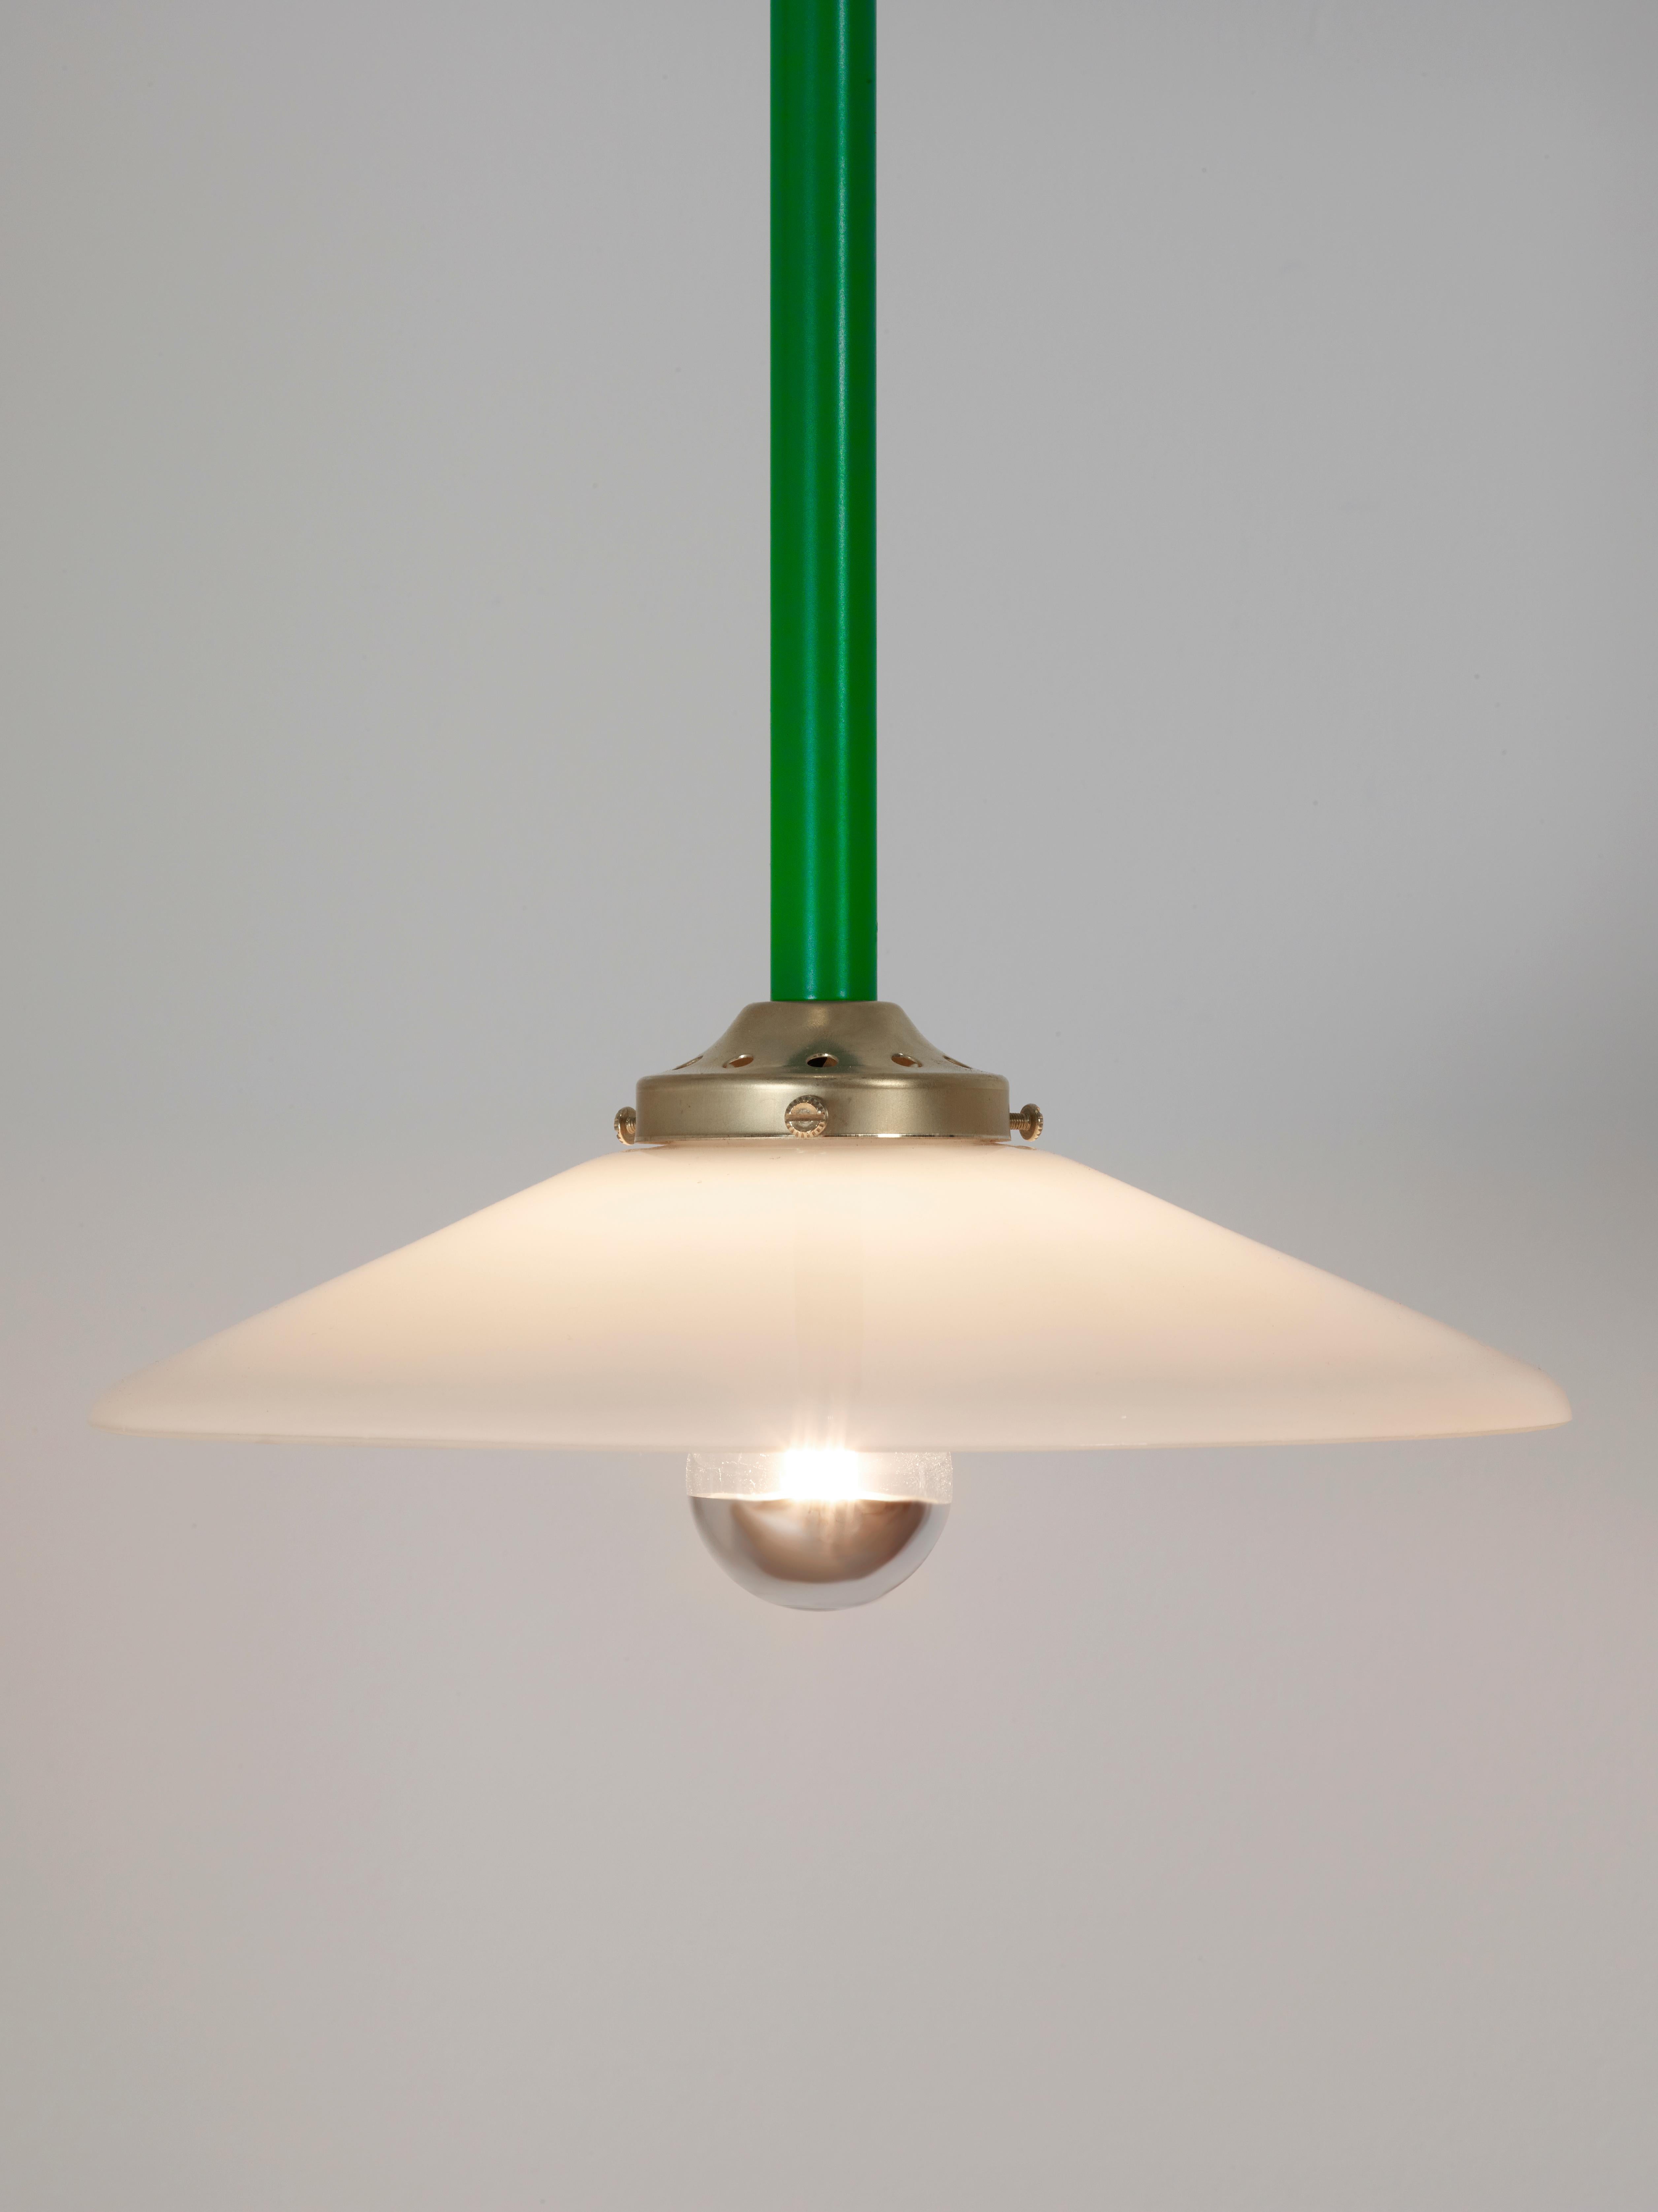 Steel Contemporary Ceiling Lamp N°5 by Muller Van Severen x Valerie Objects, Red For Sale